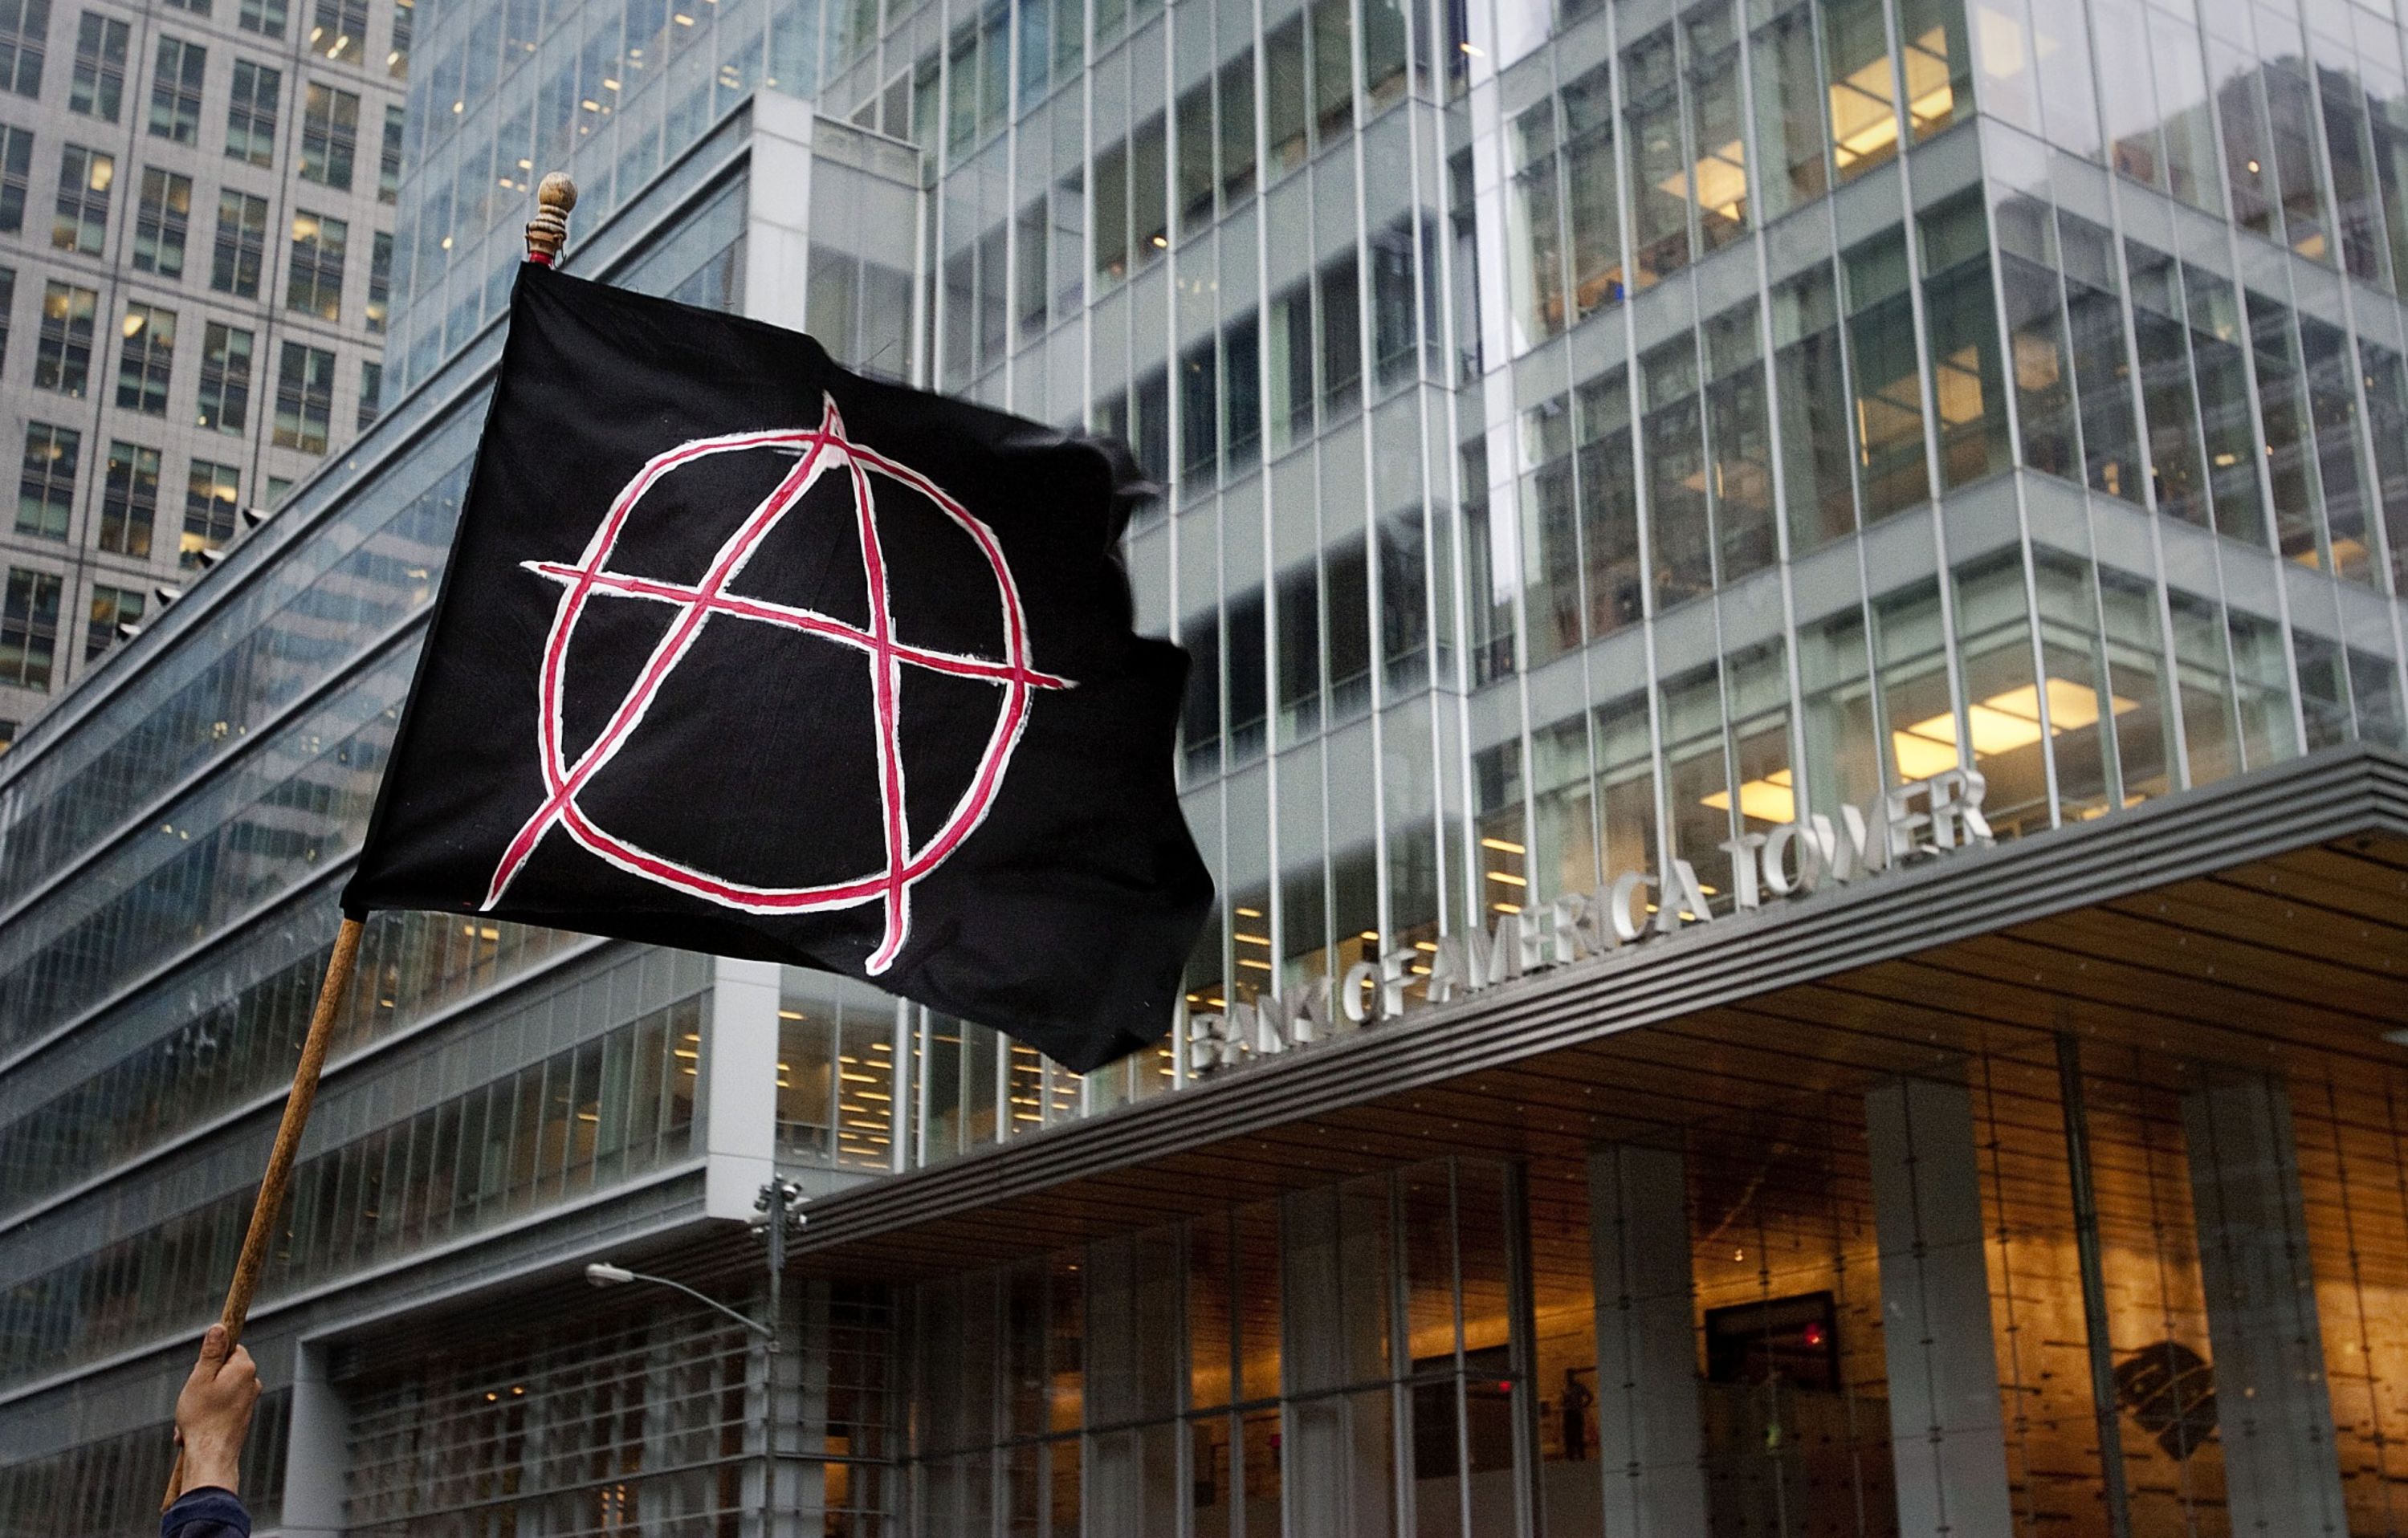 Greetings from the&nbsp;“anarchist jurisdiction” of New York City: A protester flies an anarchist flag over lower Manhattan&nbsp;— in 2012, during Occupy Wall Street demonstrations.&nbsp;